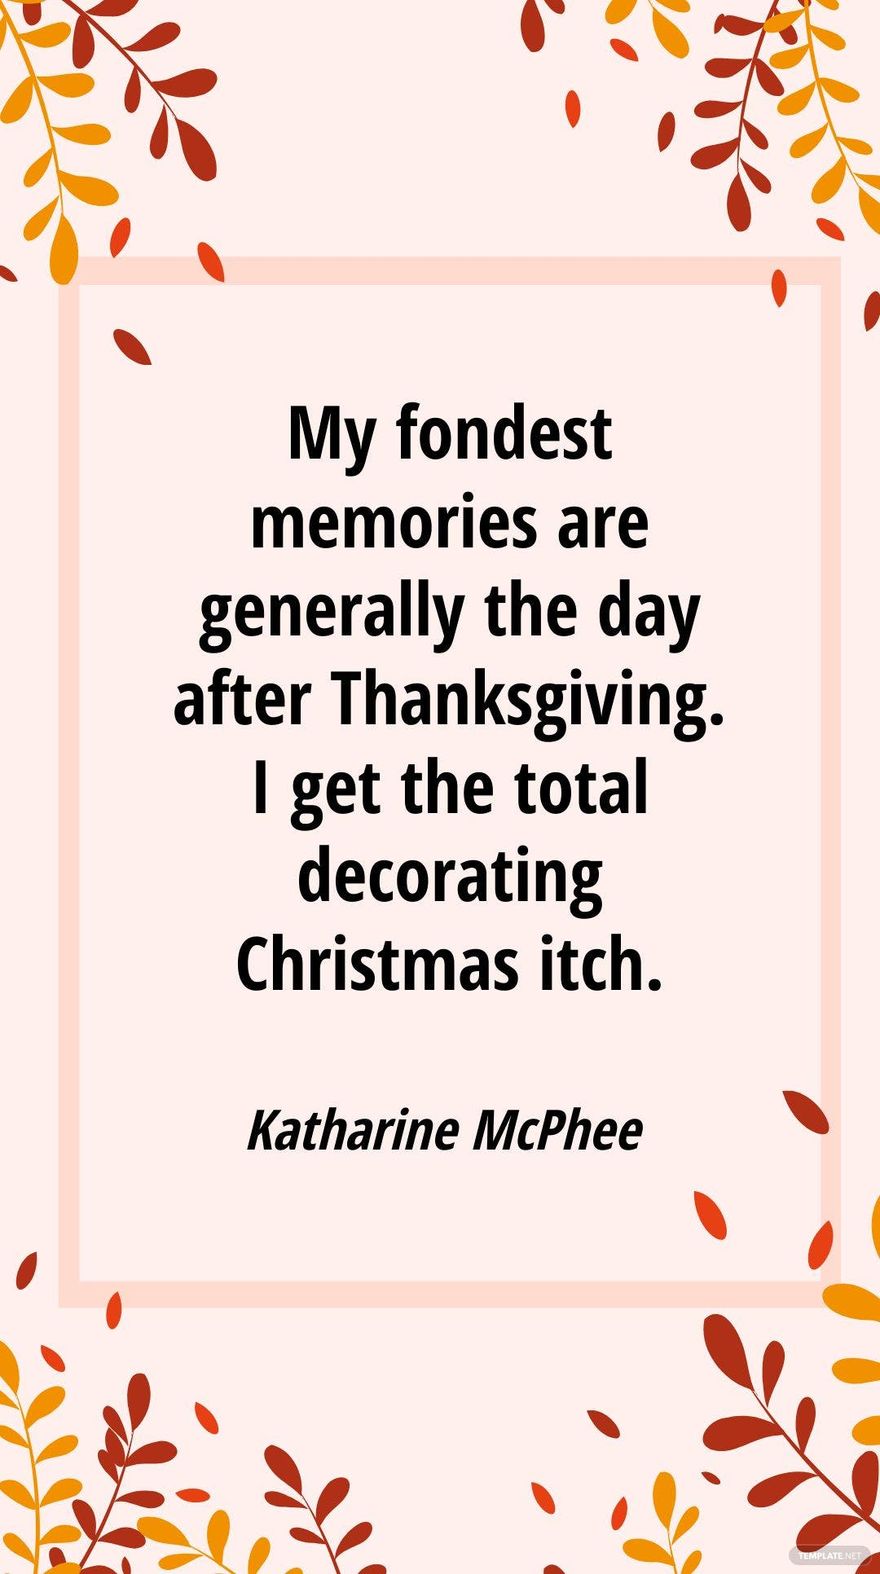 Free Katharine McPhee - My fondest memories are generally the day after Thanksgiving. I get the total decorating Christmas itch.